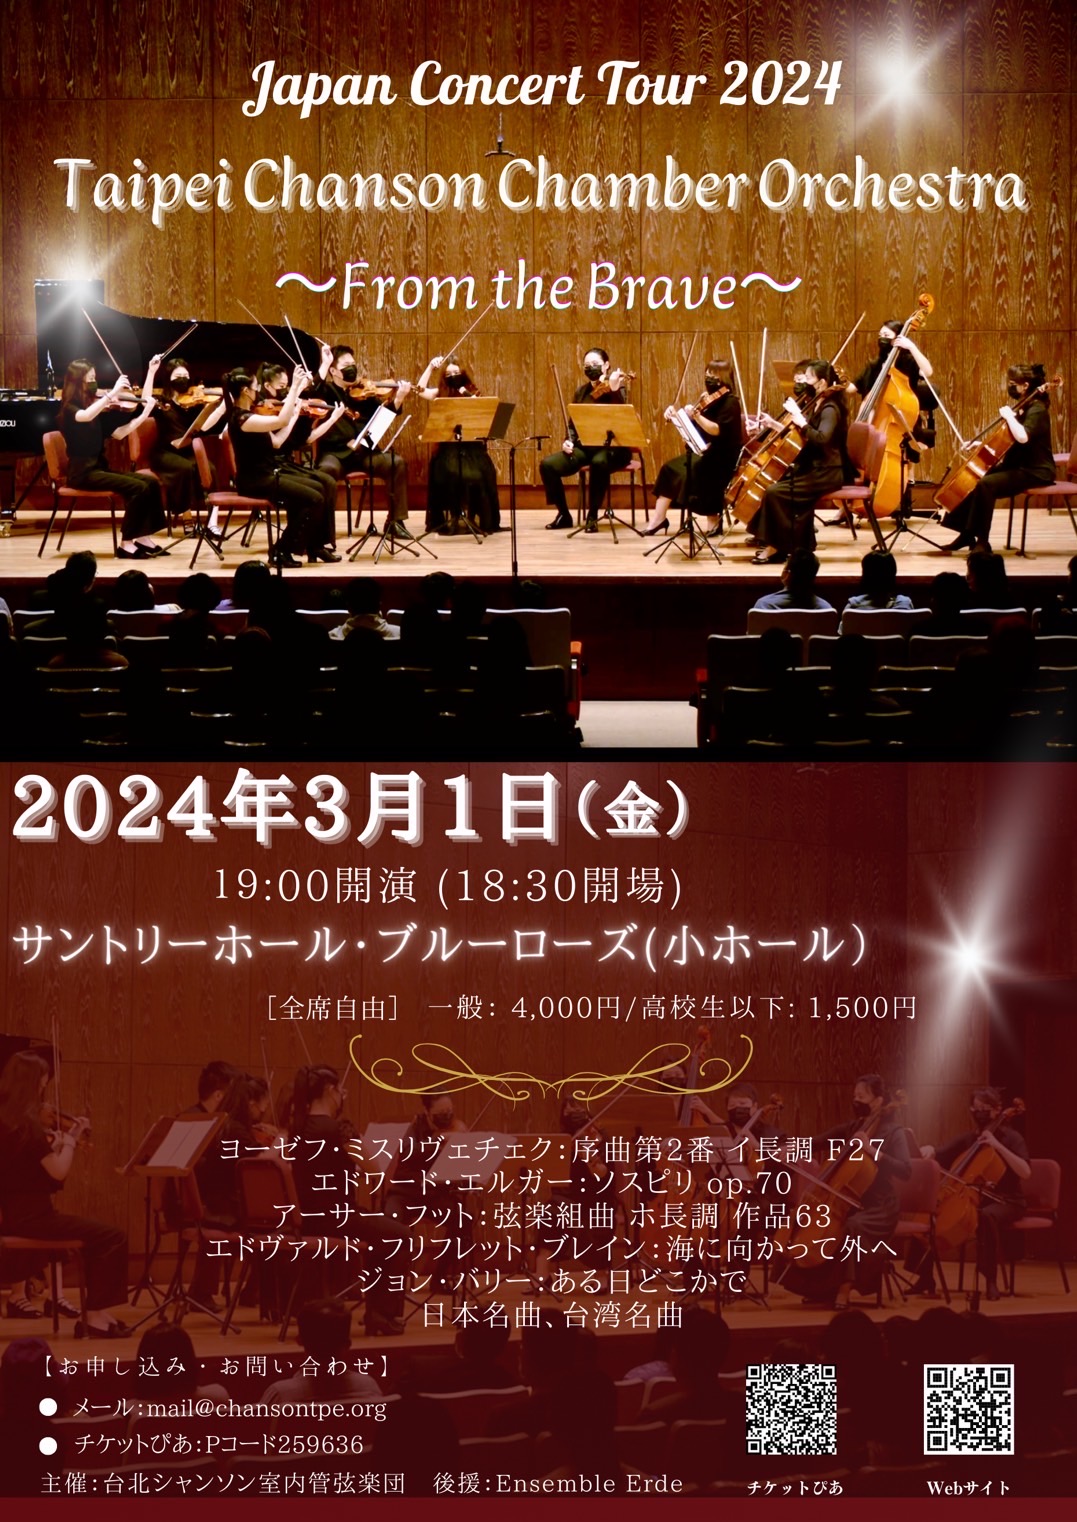 《From the Brave》 台湾香頌室内管弦楽団  日本コンサートツアー